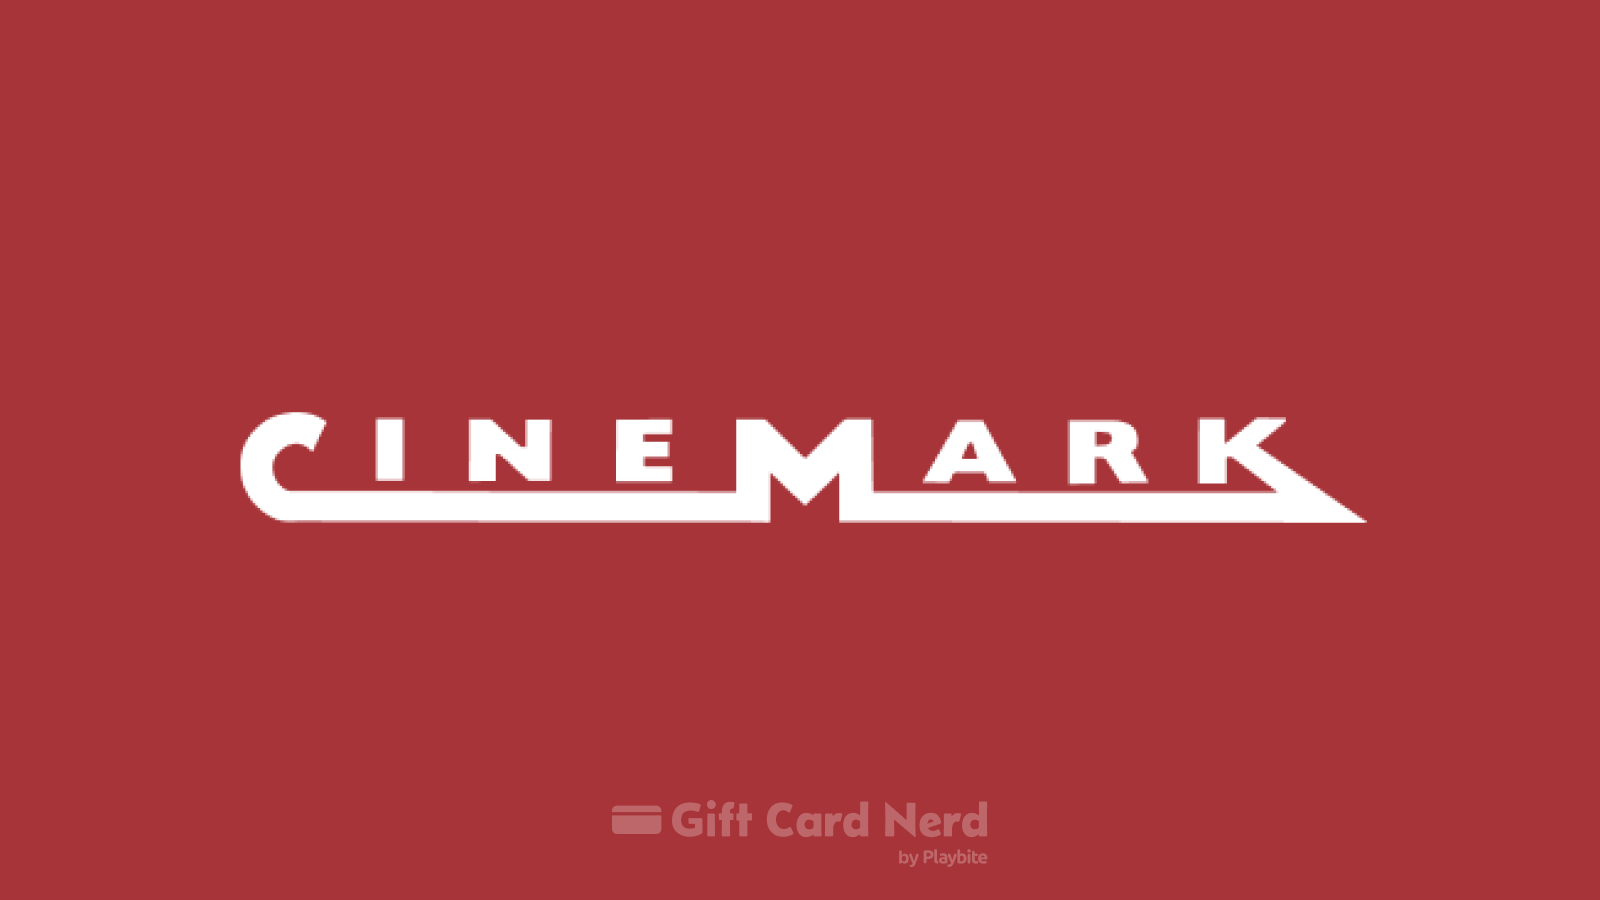 Can I Use a Cinemark Gift Card on Apple Wallet?